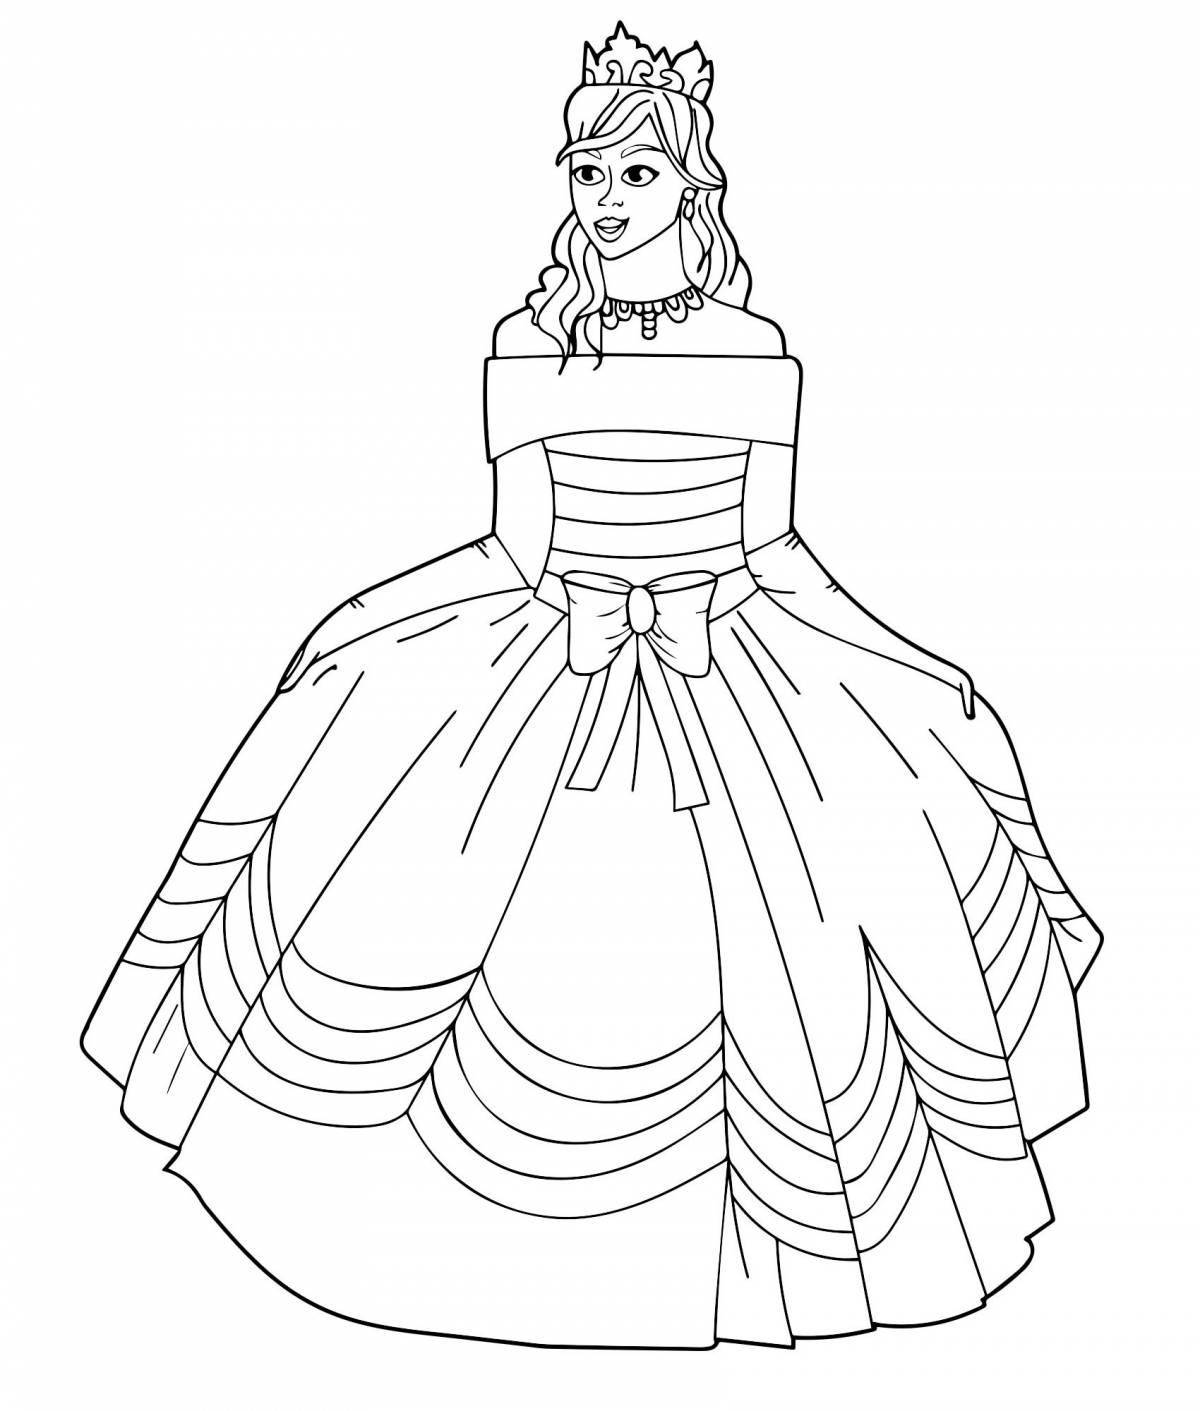 Fun coloring of a girl in a dress